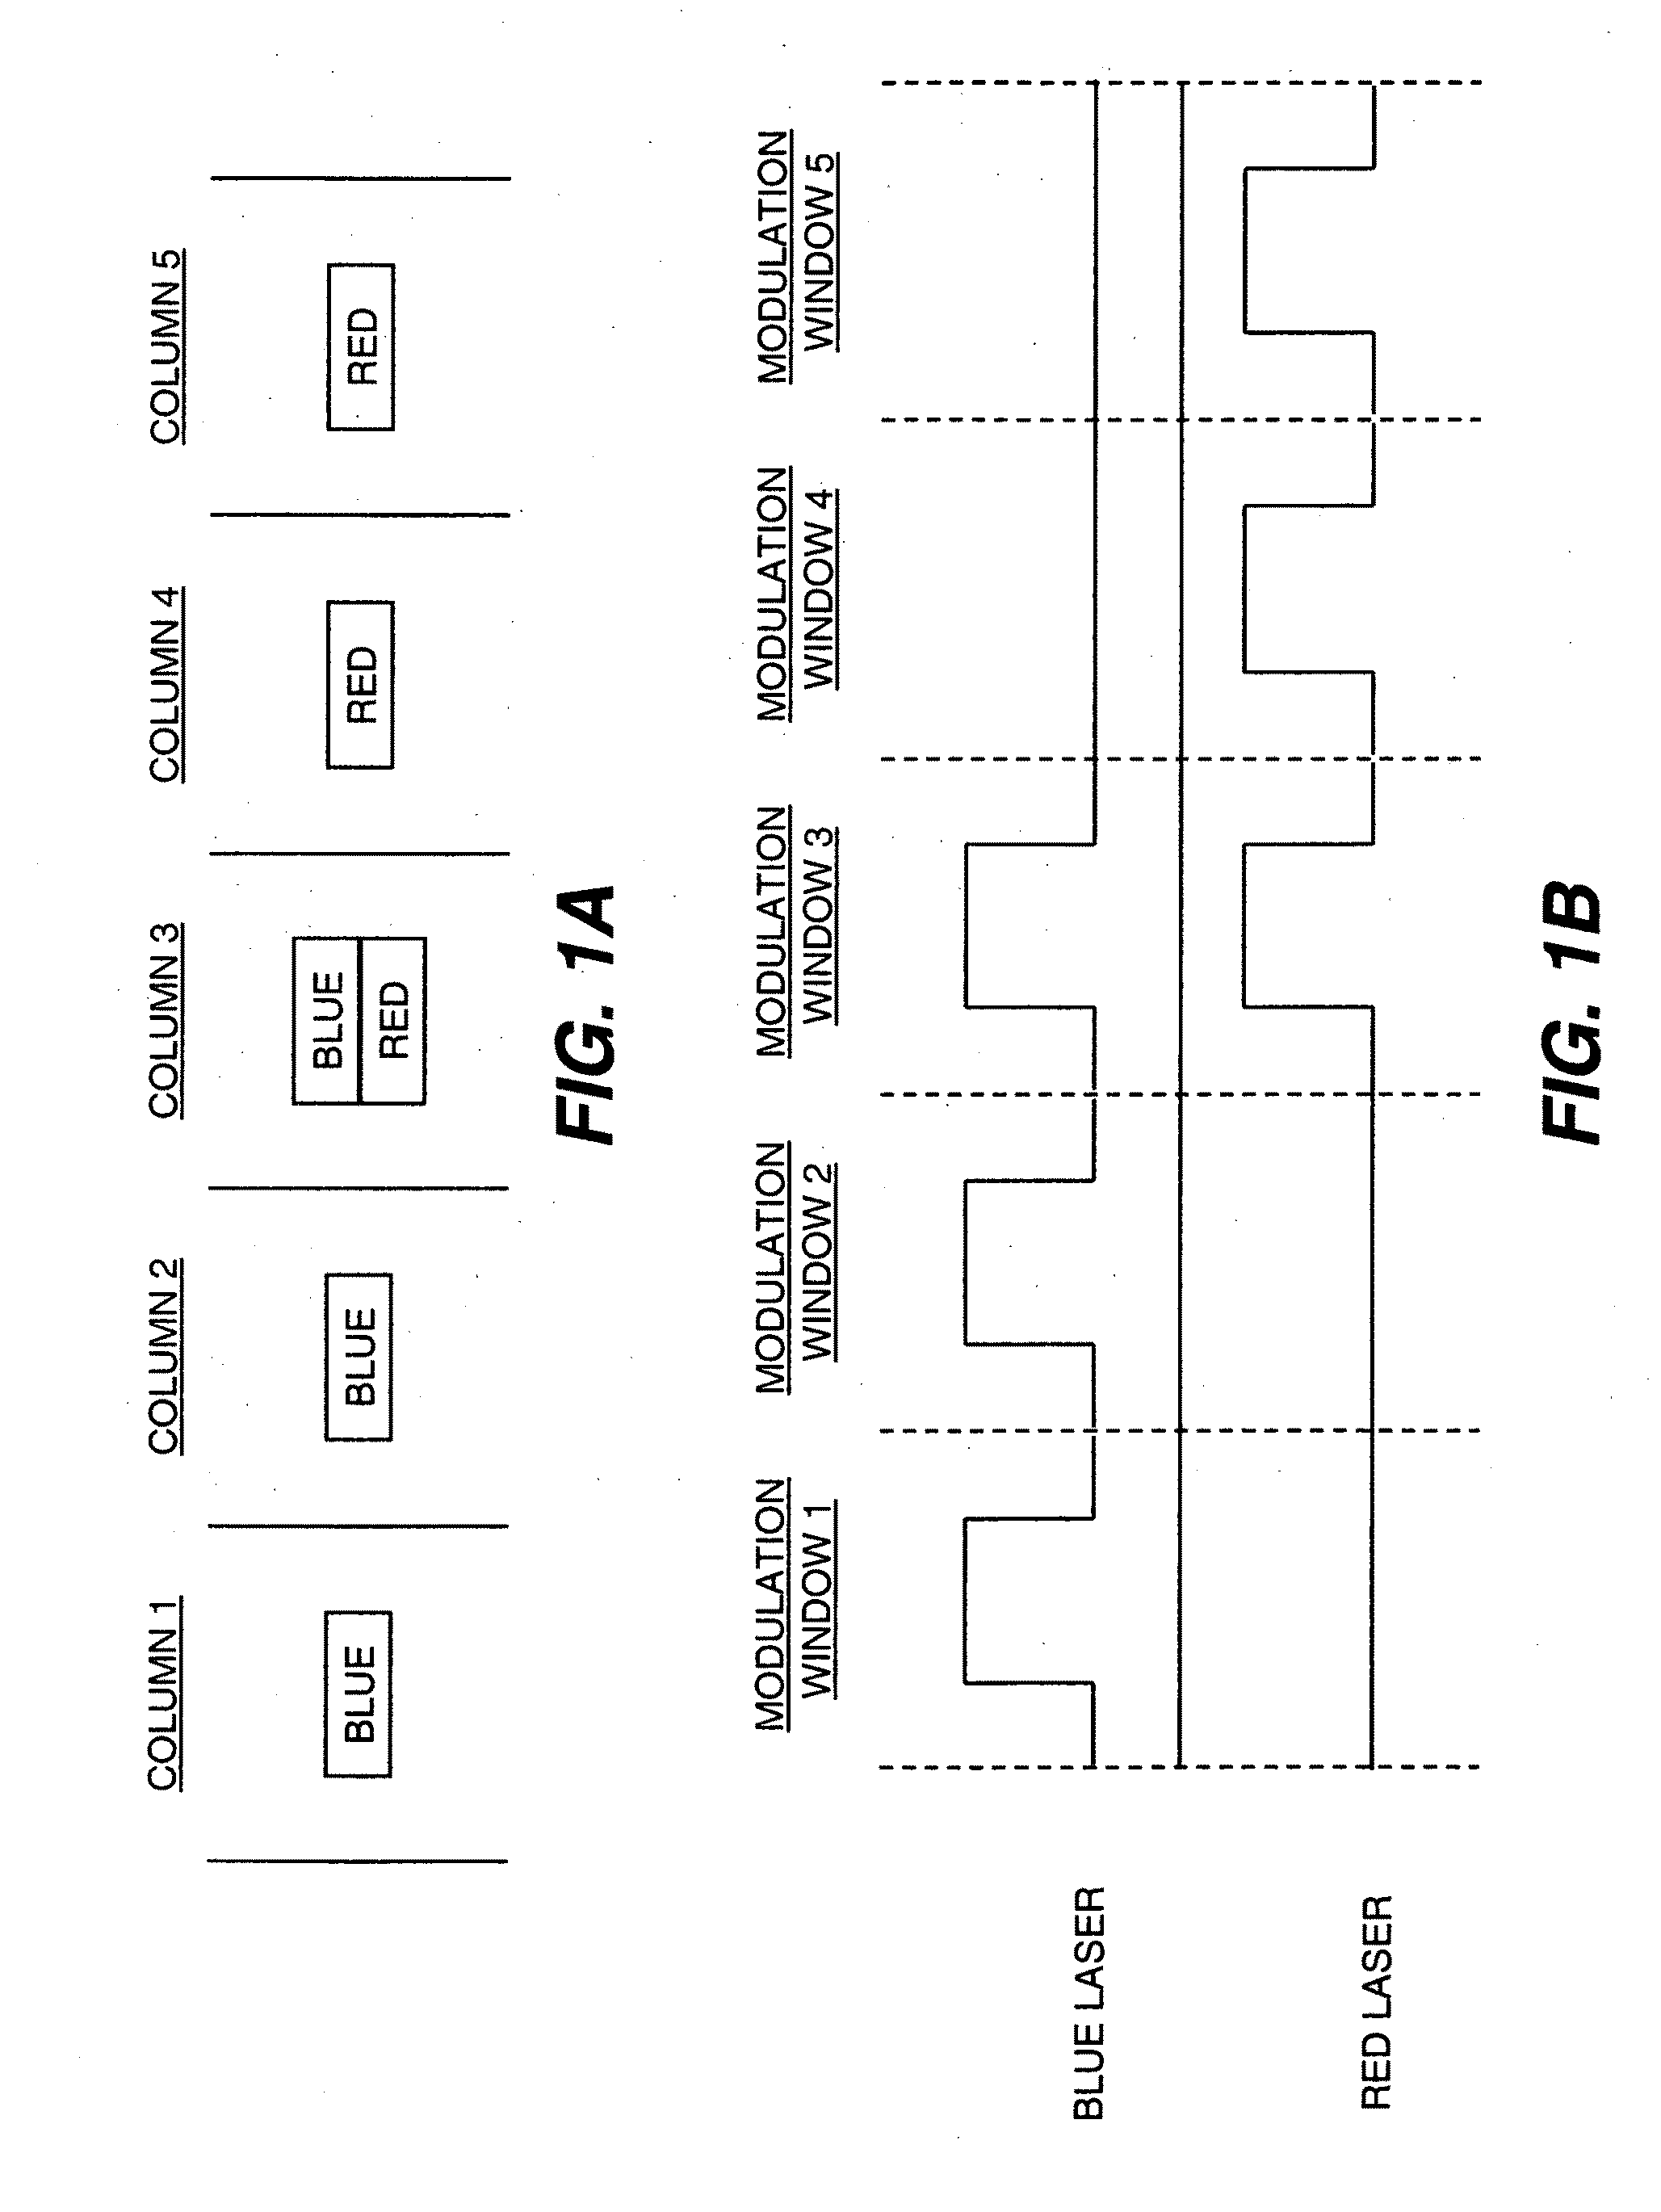 Edge reproduction in optical scanning displays